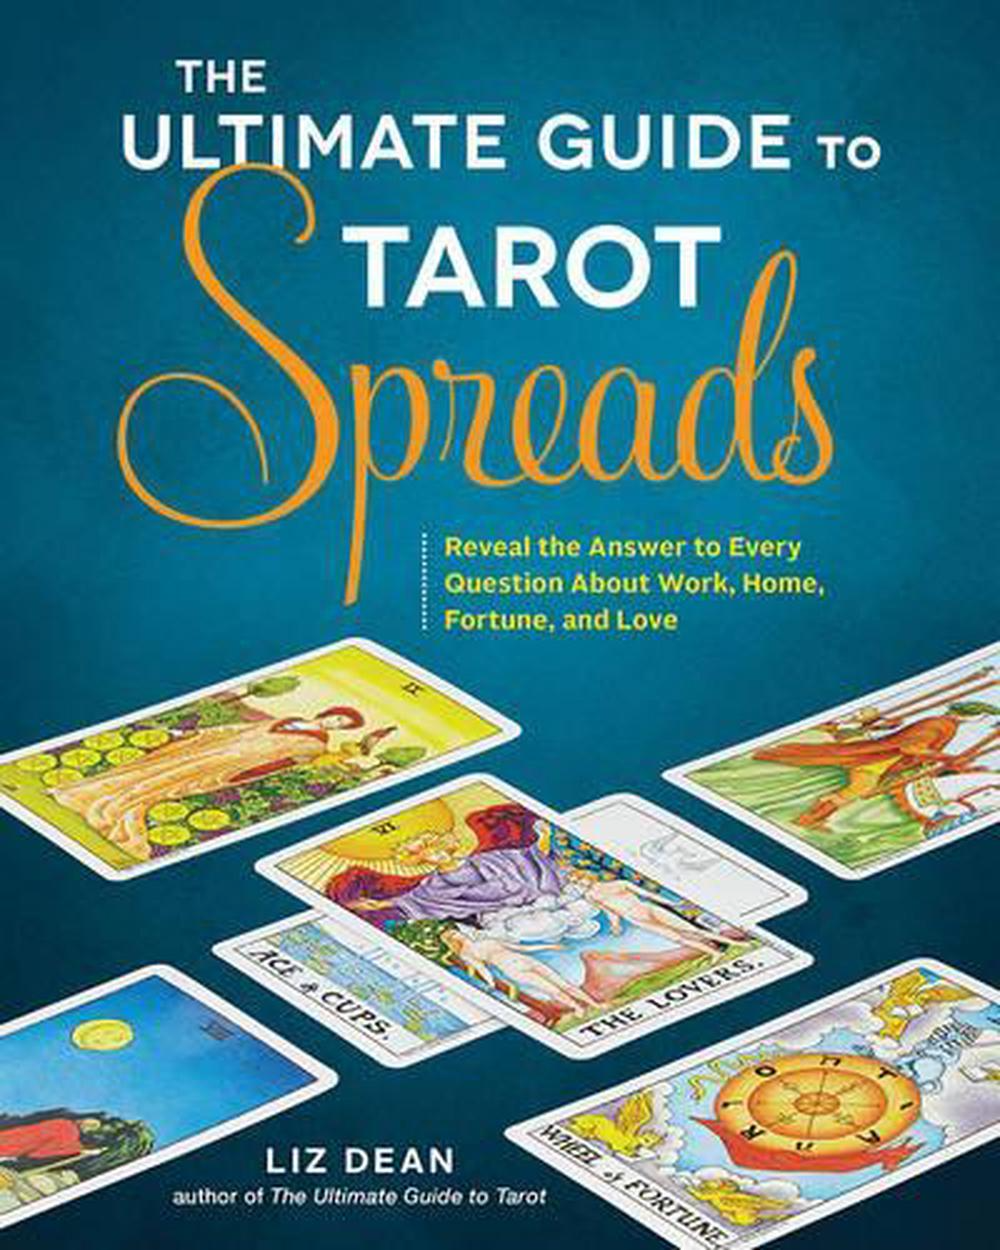 The Ultimate Guide To Tarot  Spreads